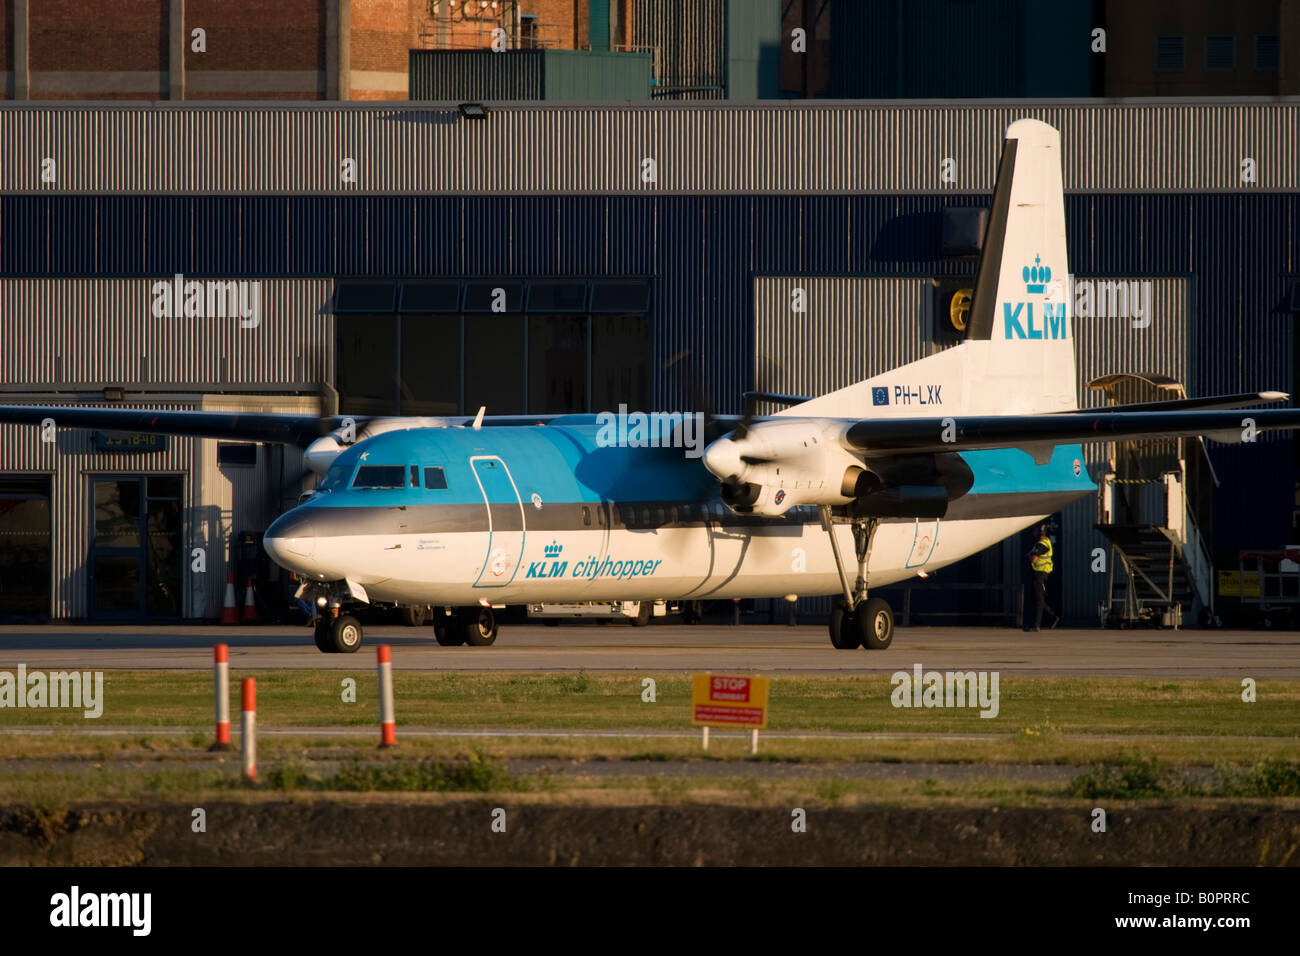 Commercial aircraft Fokker 50 KLM taxiing at London City Airport, England, UK Stock Photo